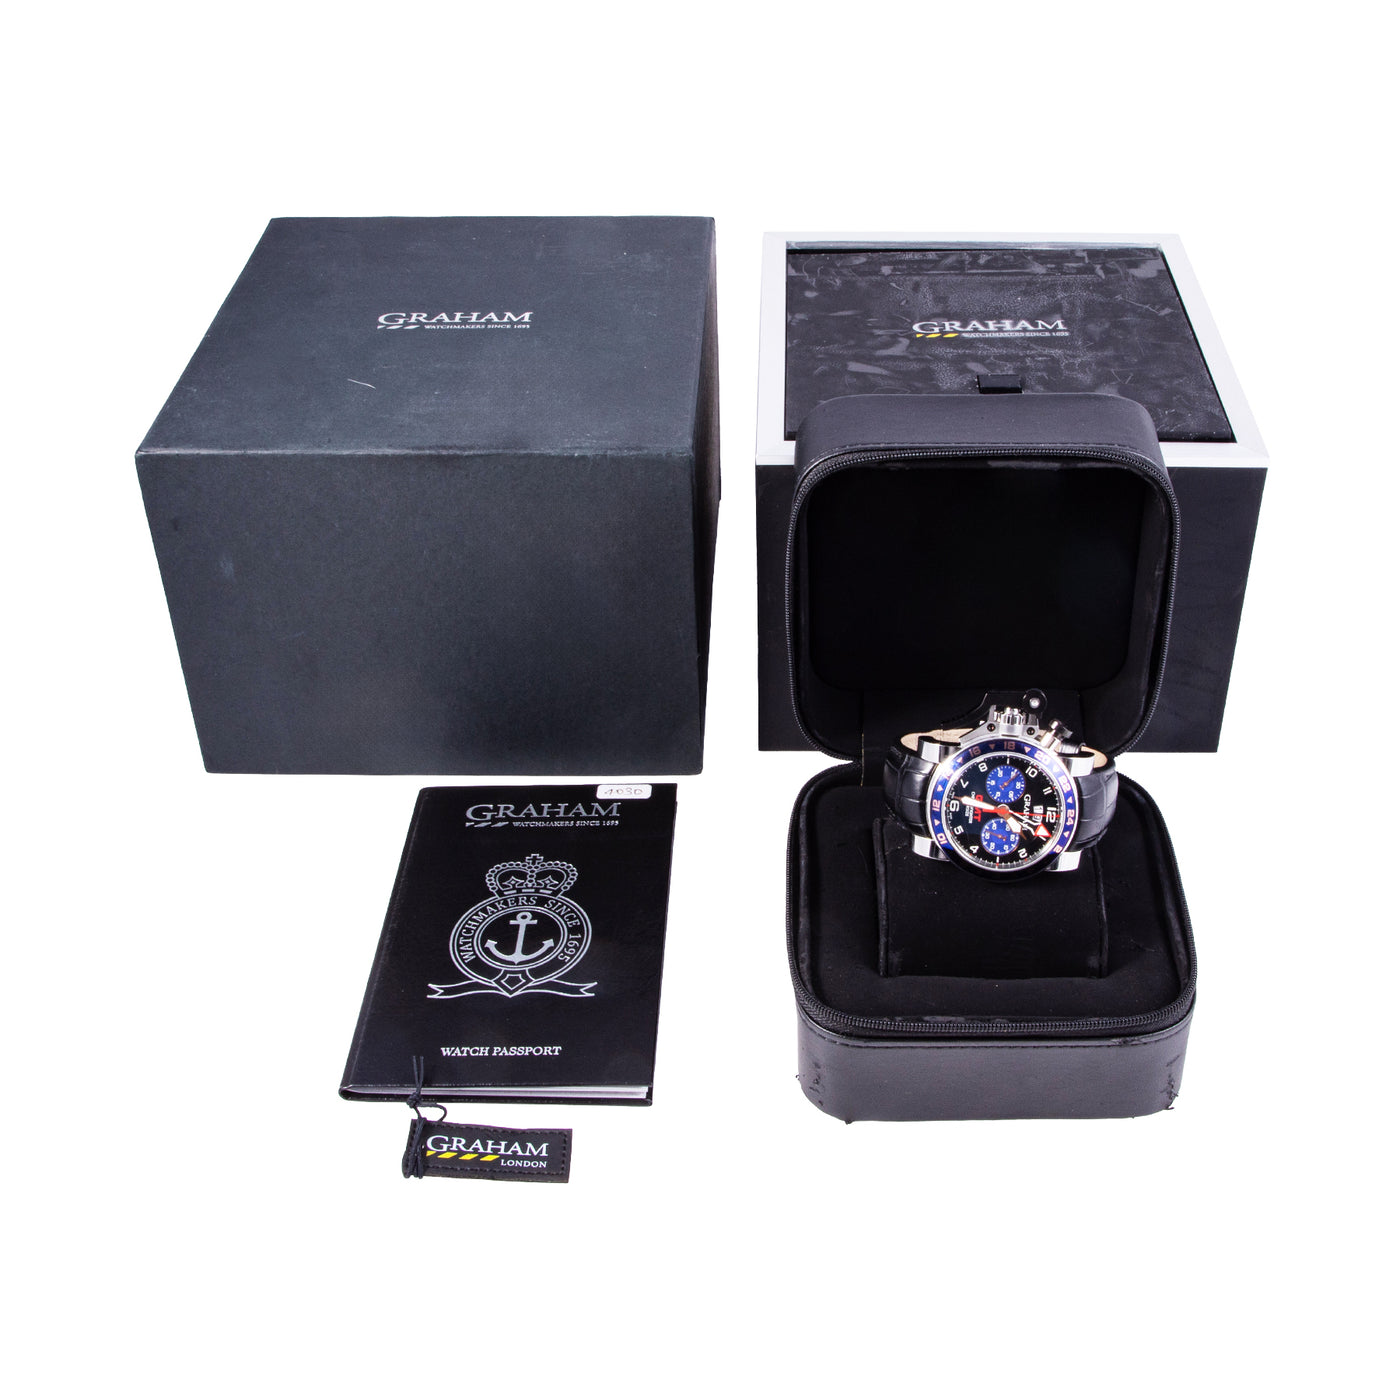 Graham Chronofighter Oversize GMT 20VGS.B26A.K41S/02.C505 full set | Timepiece360